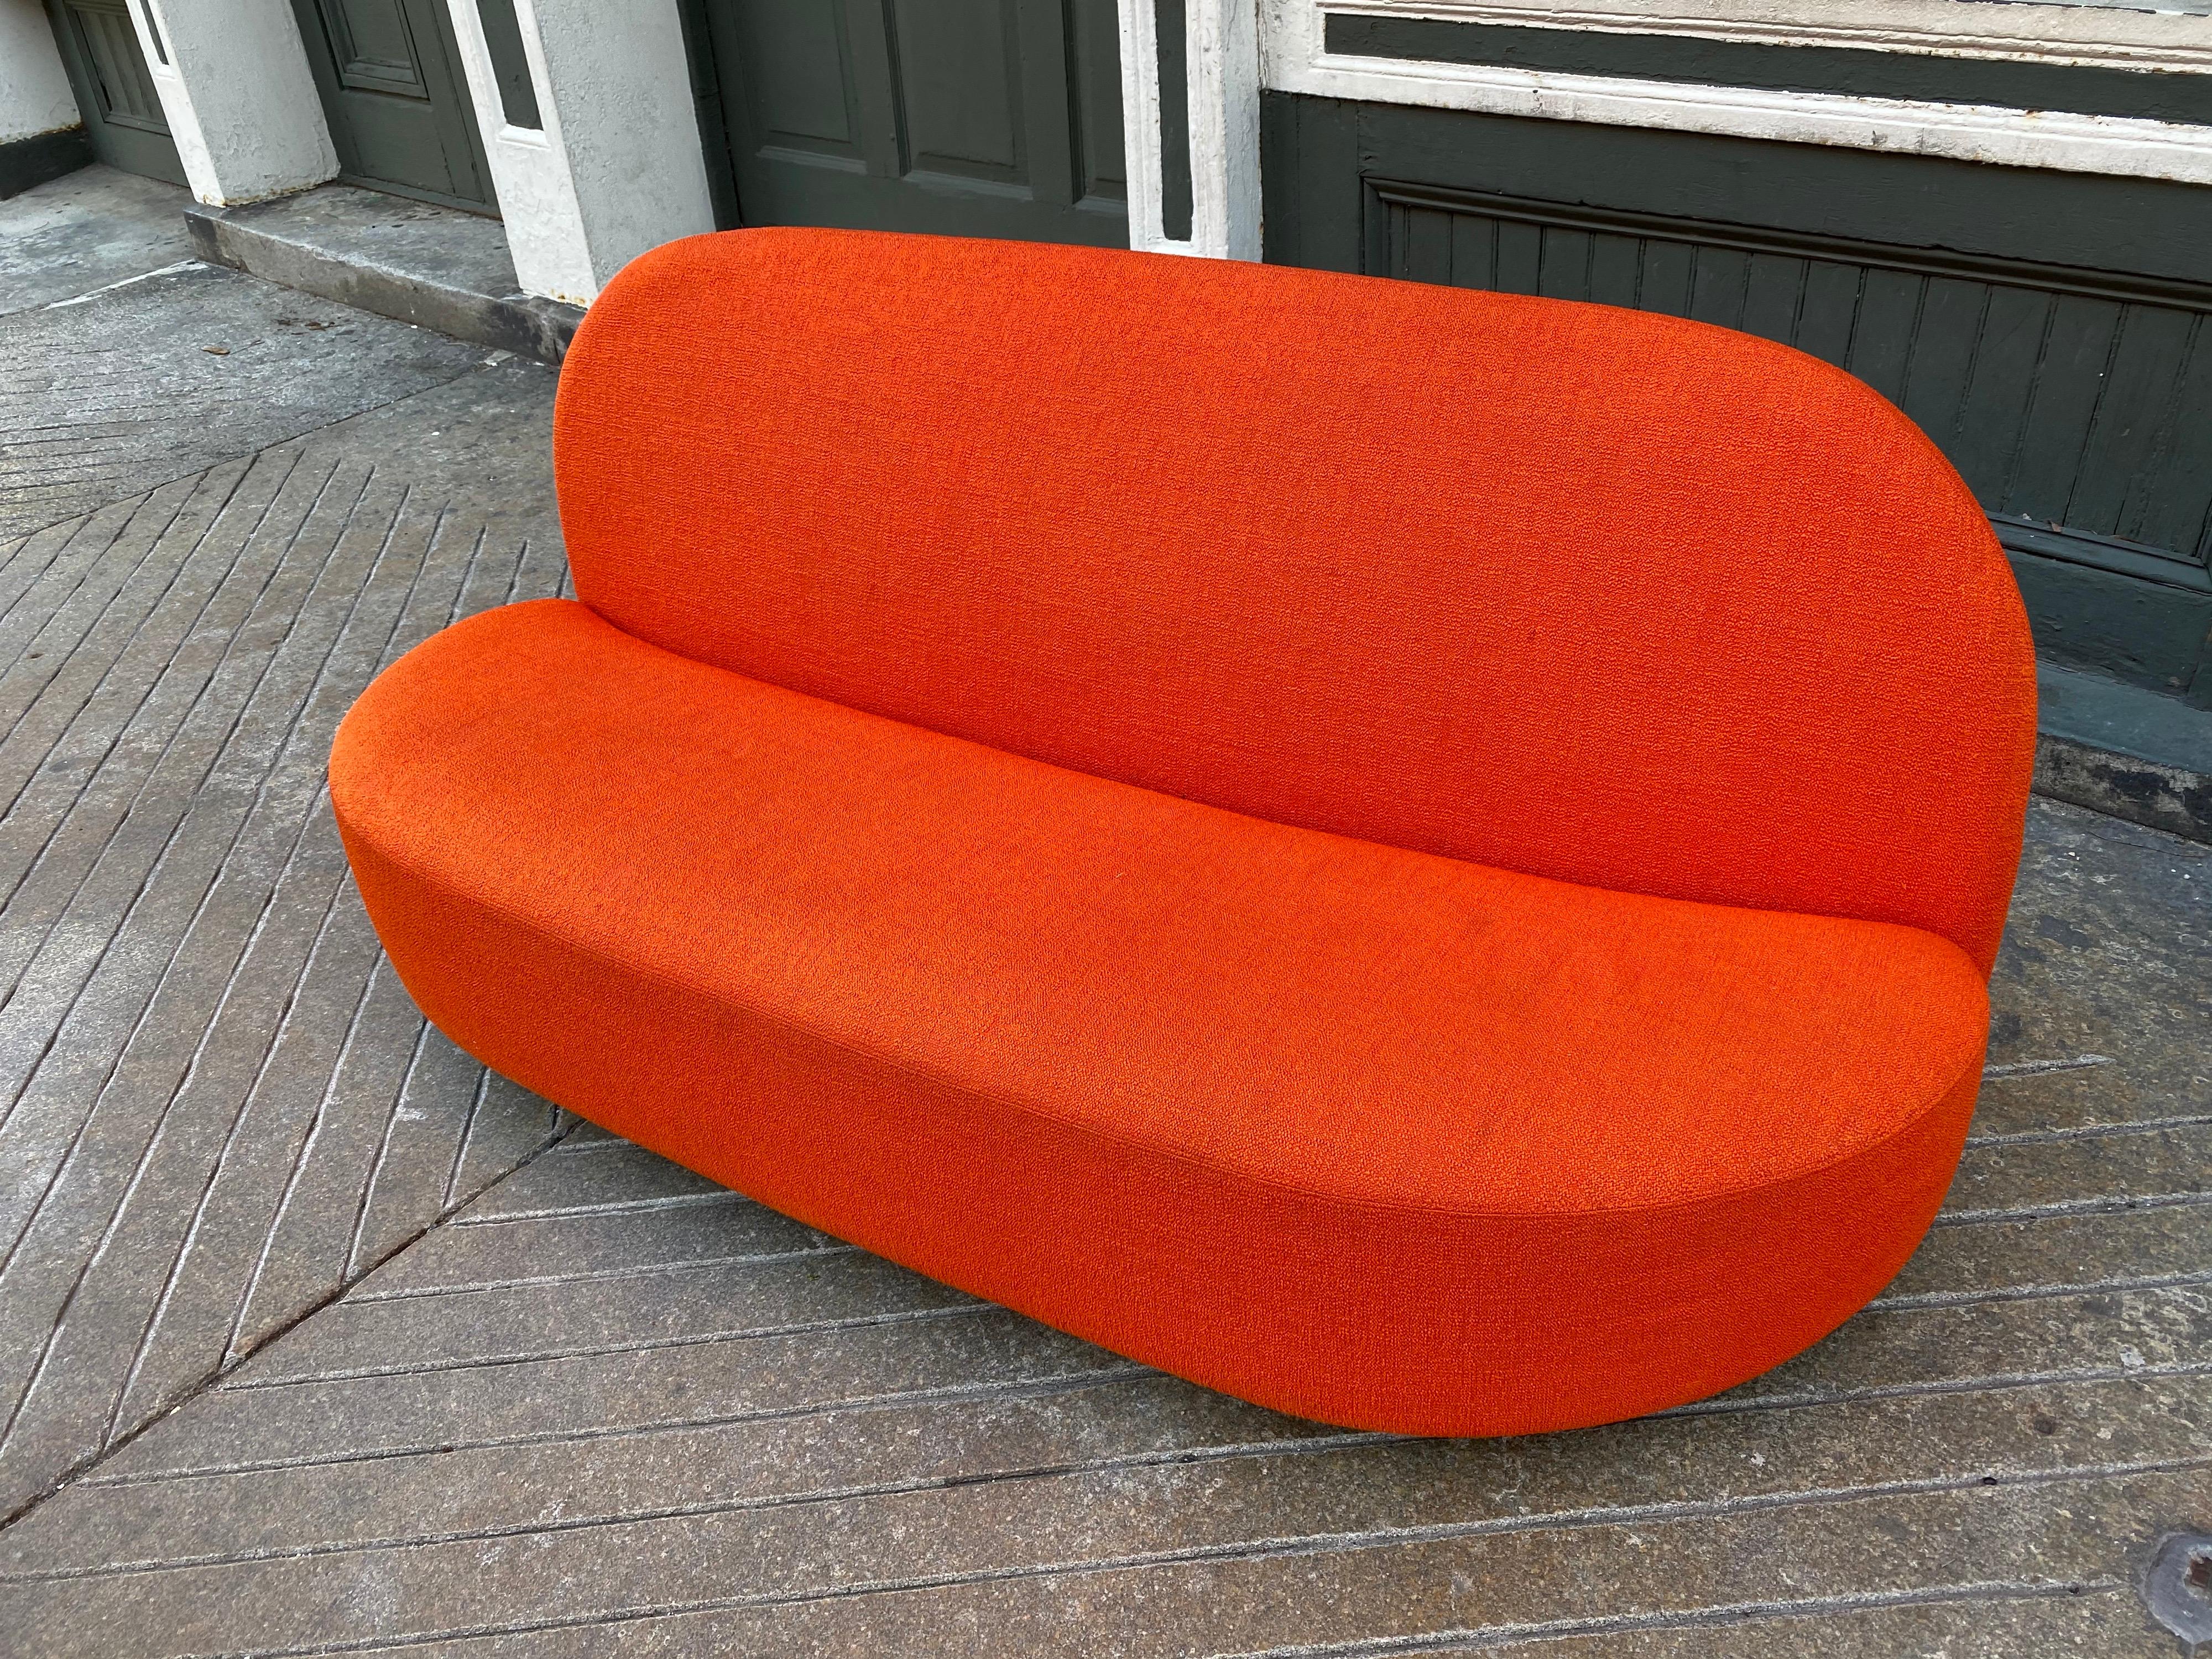 Pierre Paulin Elysee loveseat for Ligne Roset. Original Paulin Design taken from his archives and produced with high-density foam. Very sculptural design, great look and scale!